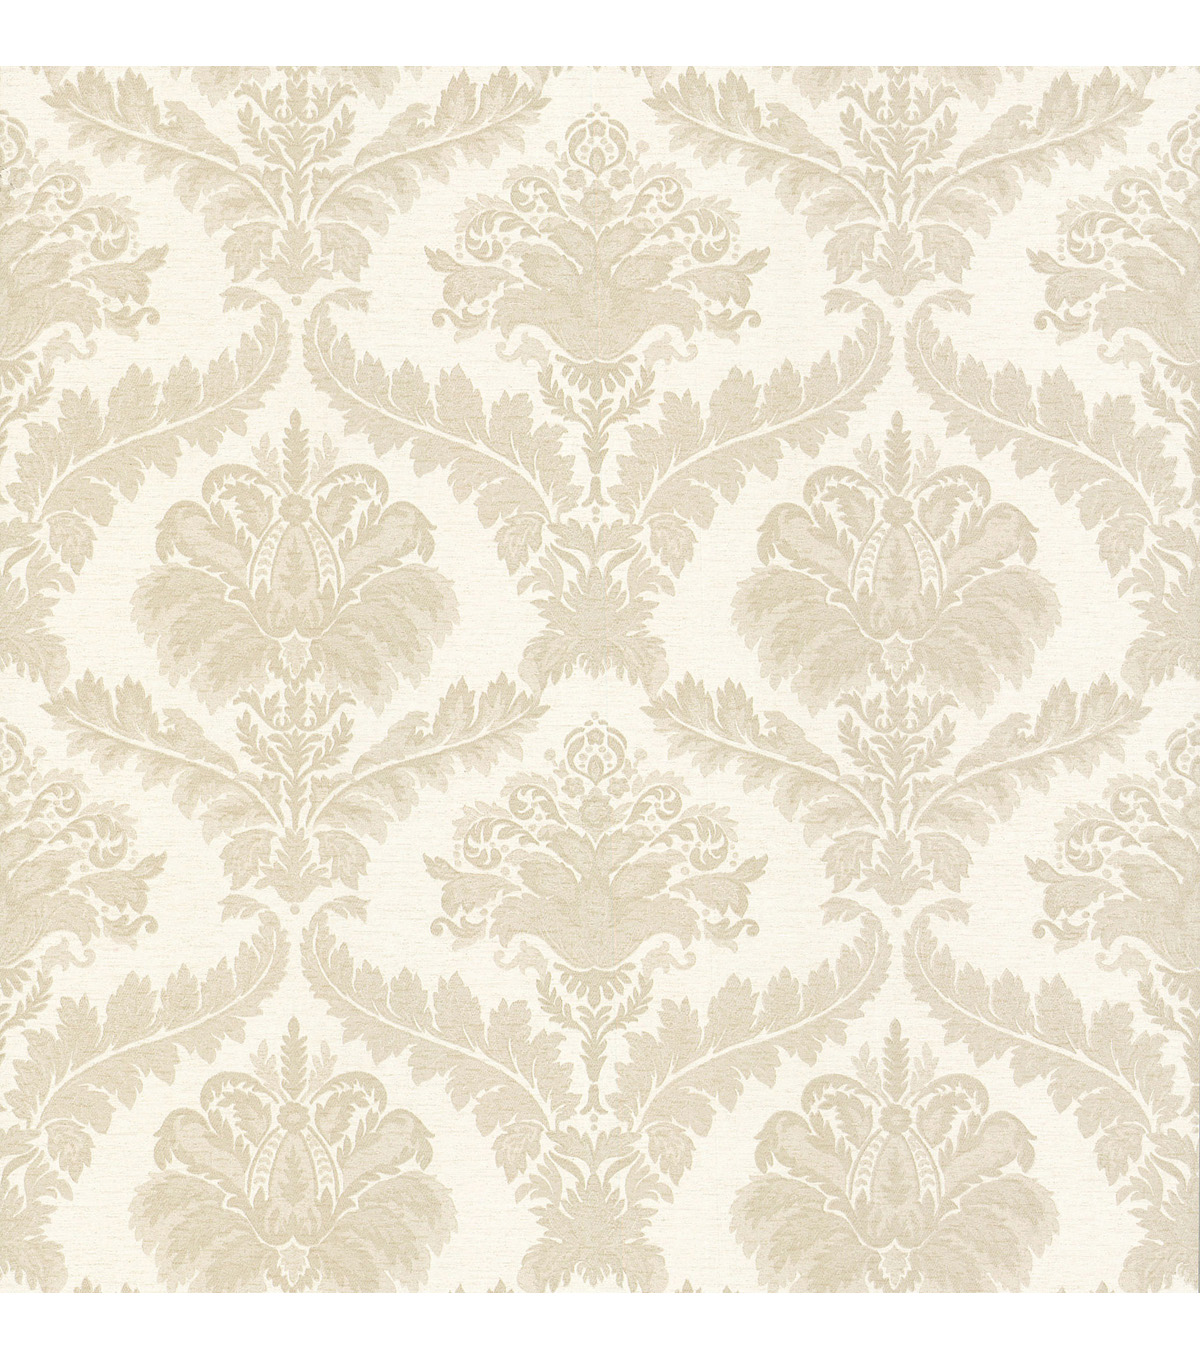 classic wallpaper texture,pattern,beige,brown,wallpaper,wrapping paper